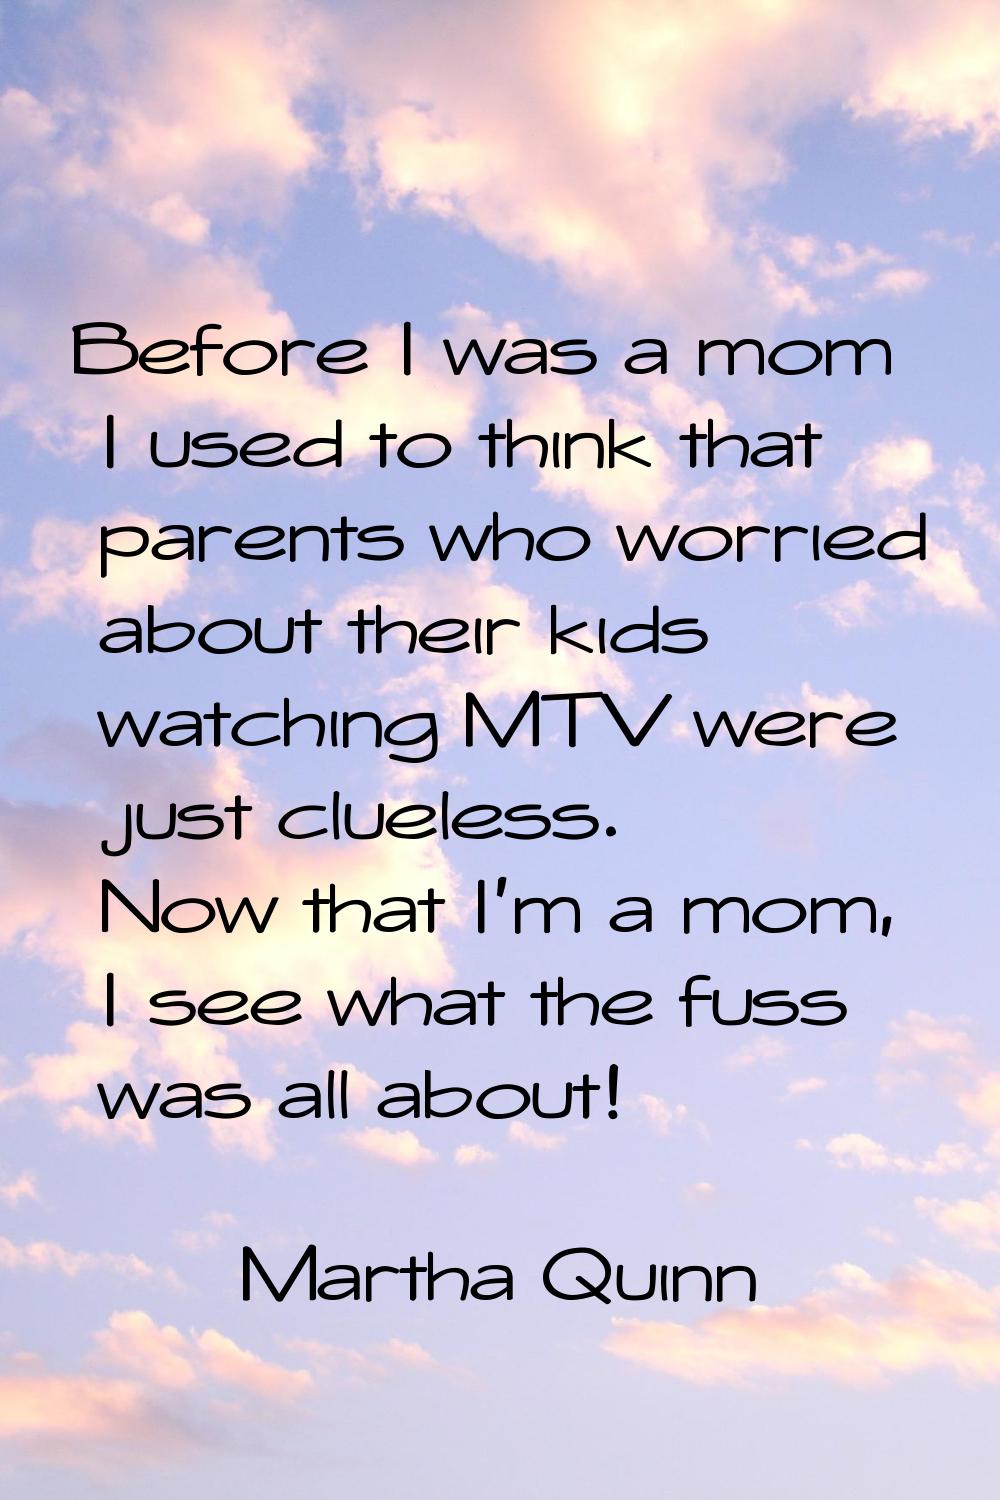 Before I was a mom I used to think that parents who worried about their kids watching MTV were just